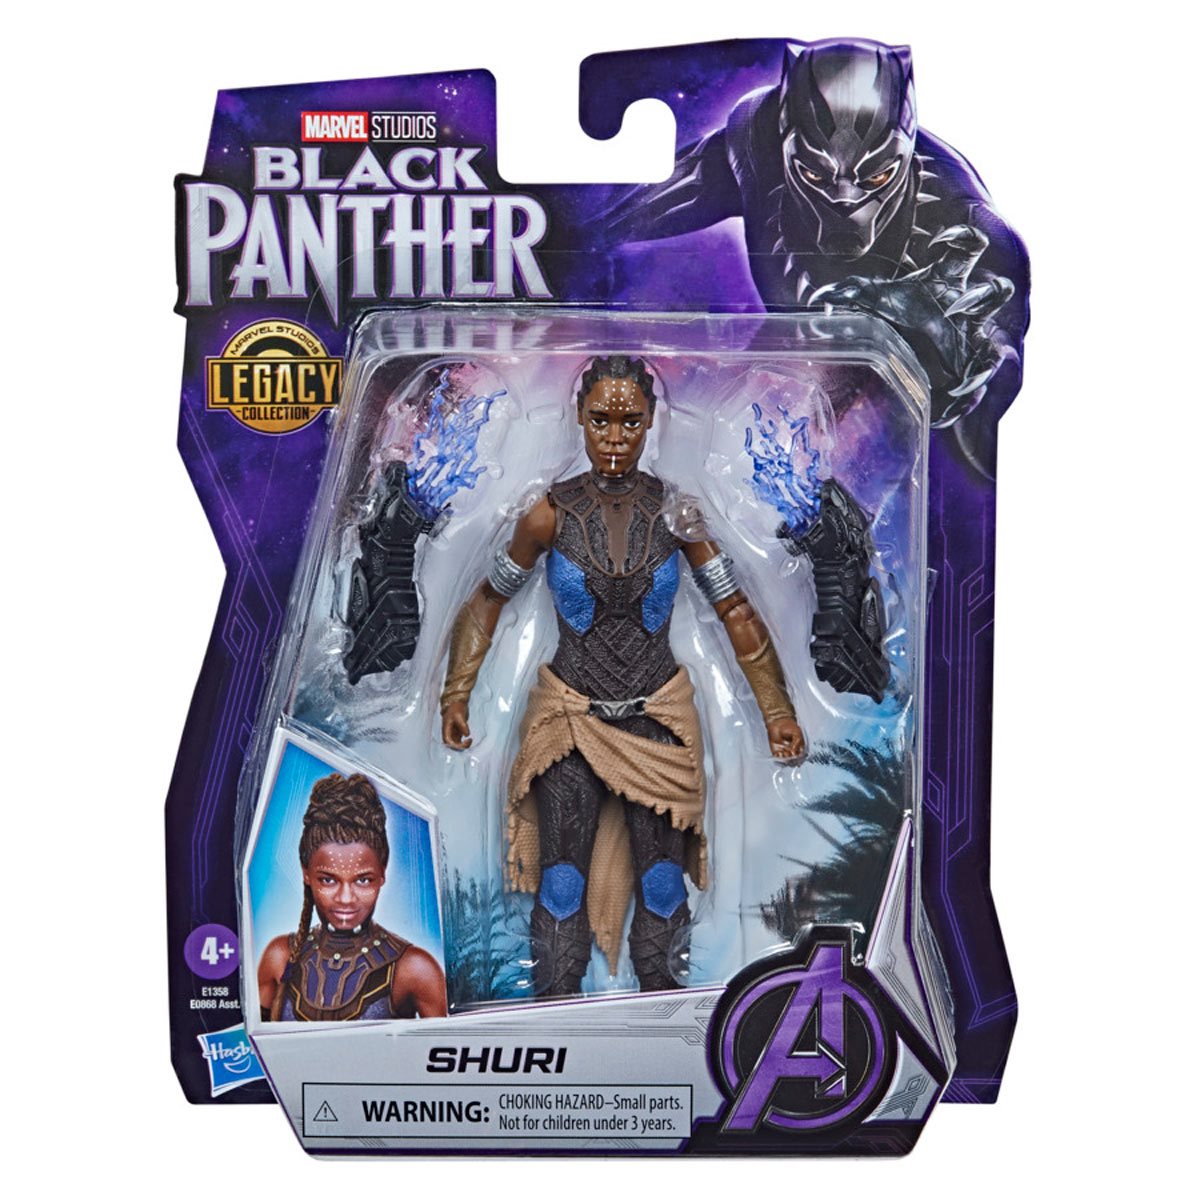 Black Panther Shuri 6" Hasbro Avengers Lengends 2018 Claw Doll Toy Marvel New 